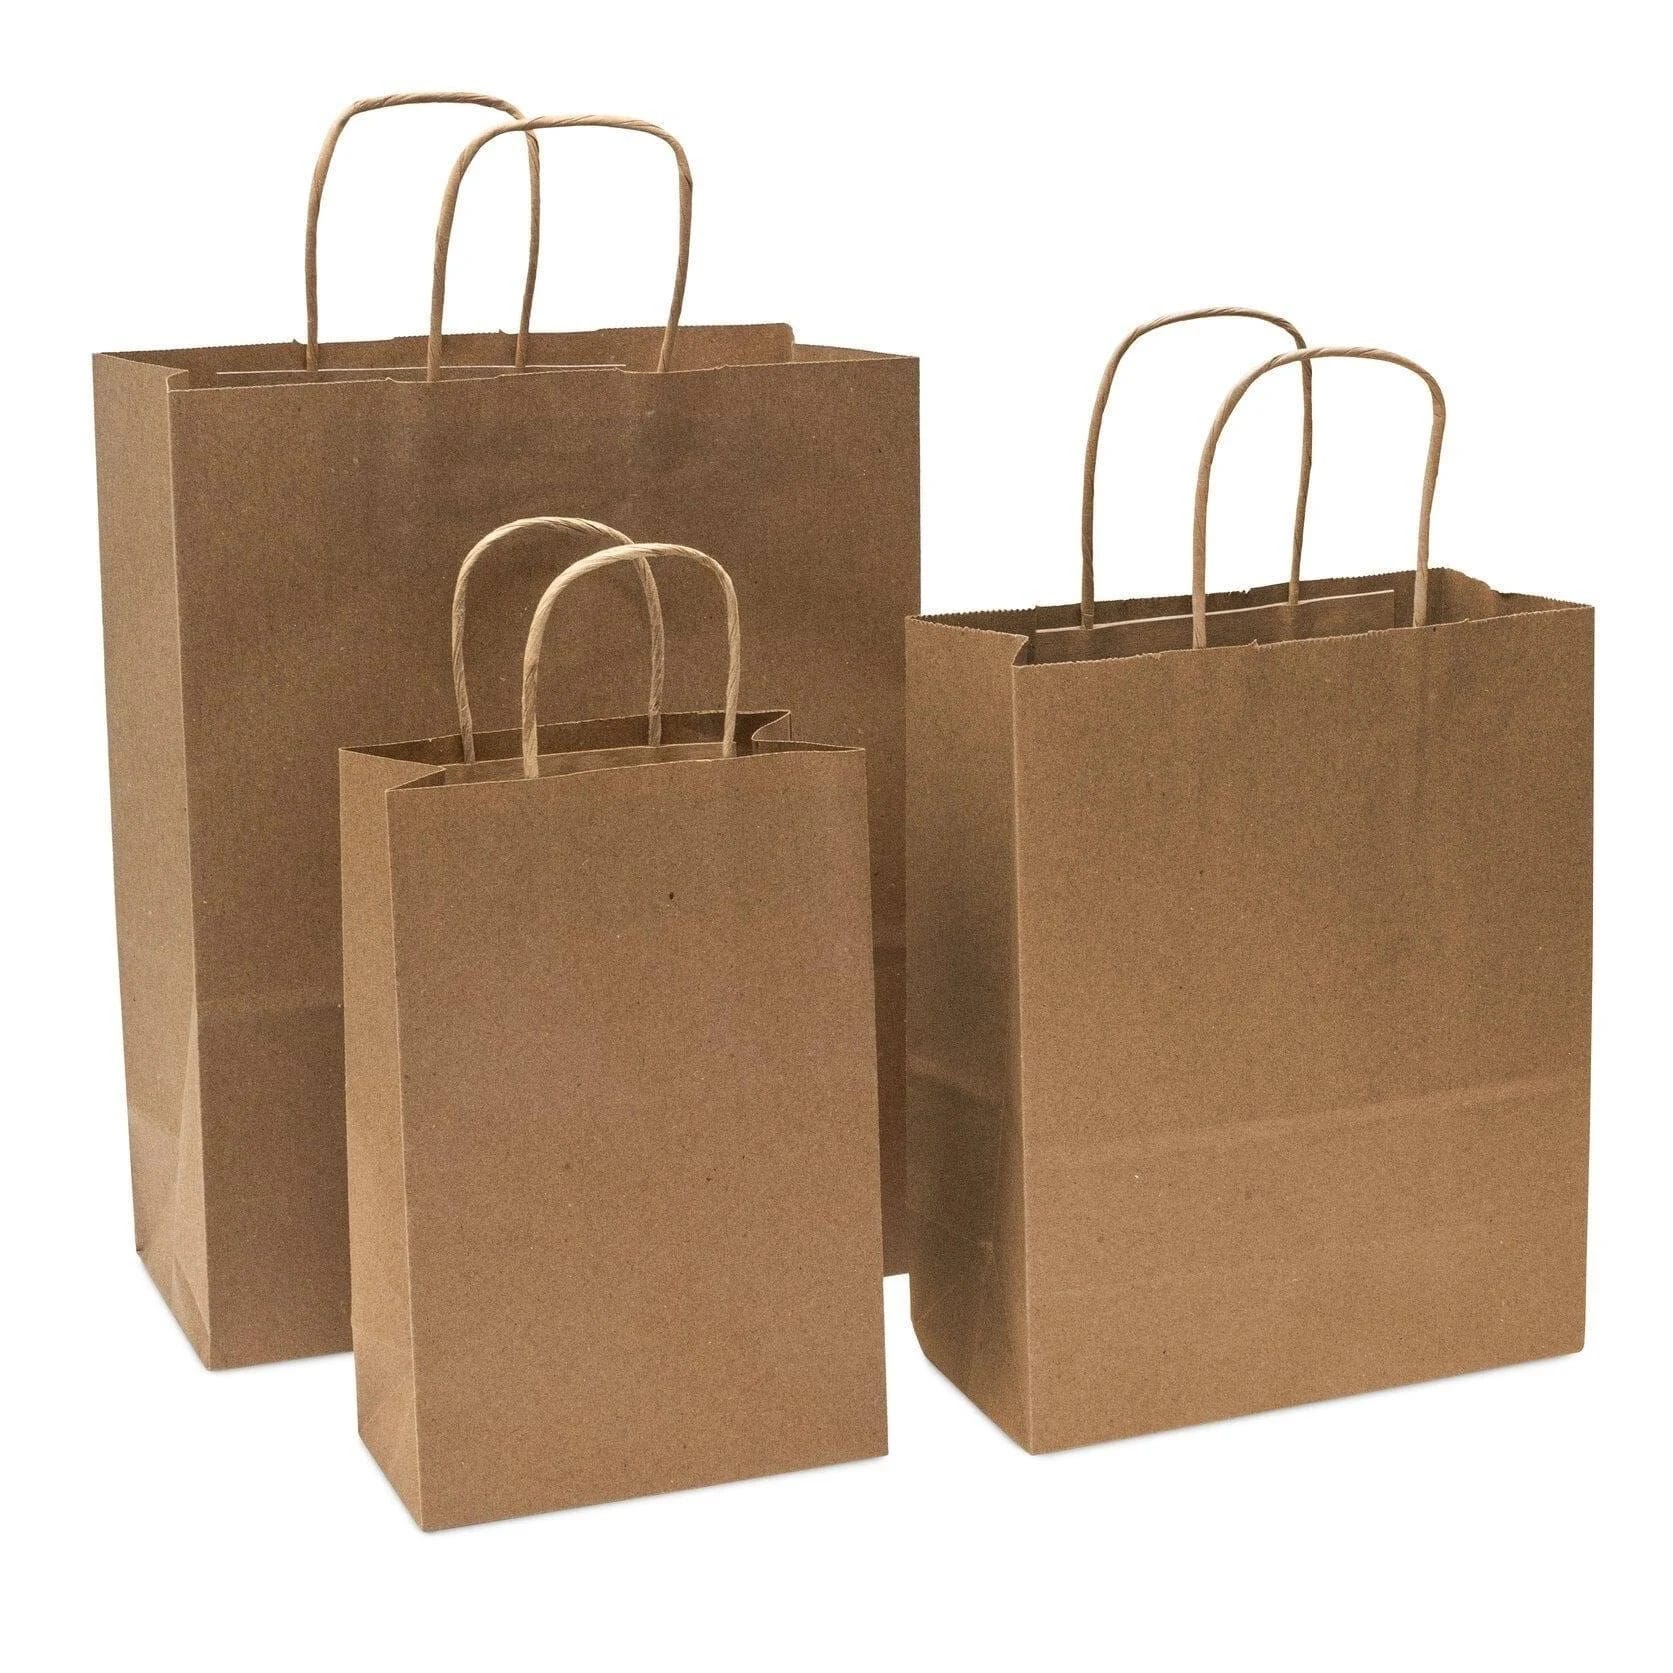 White Kraft Paper Assorted Size Gift Bags with Sturdy Handles by Prime Line Packaging | Image